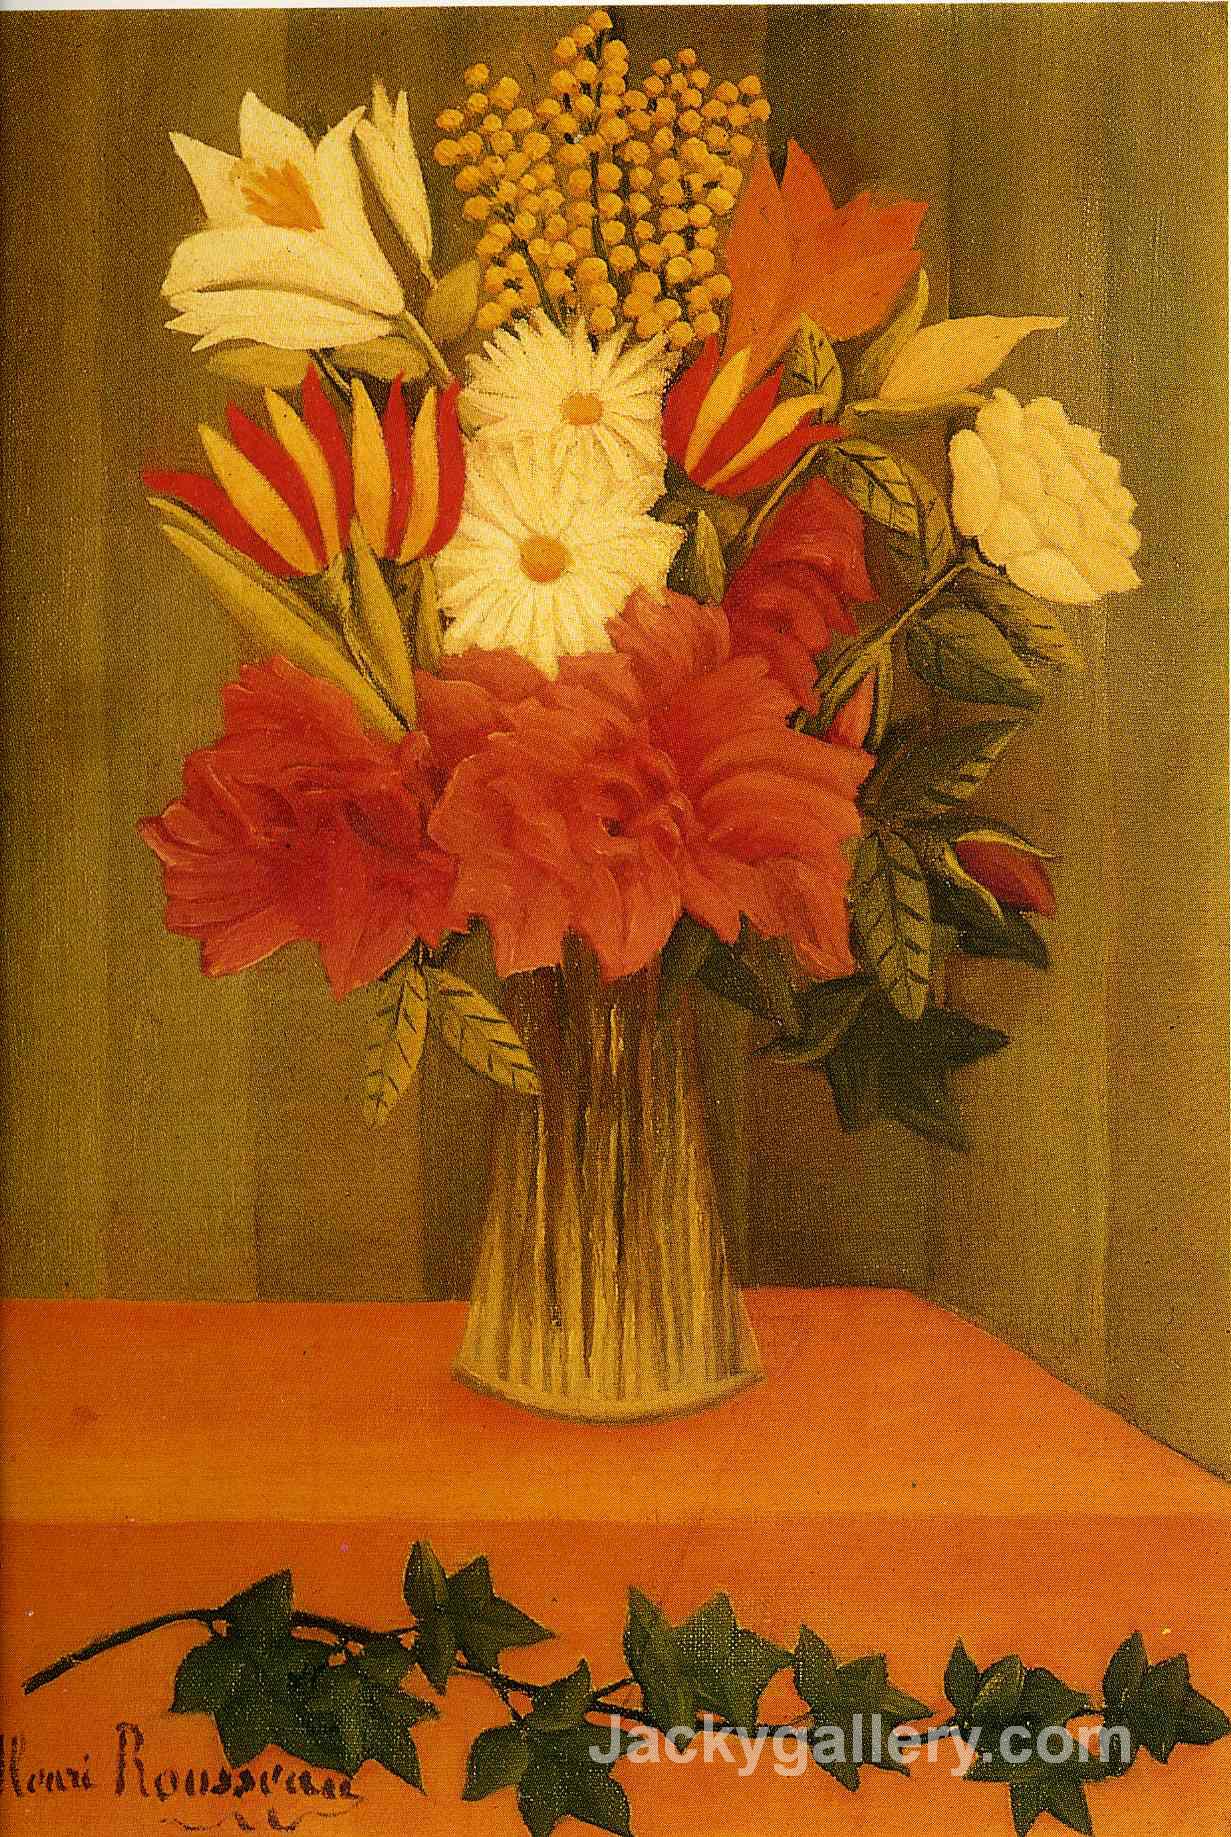 Vase of Flowers by Henri Rousseau paintings reproduction